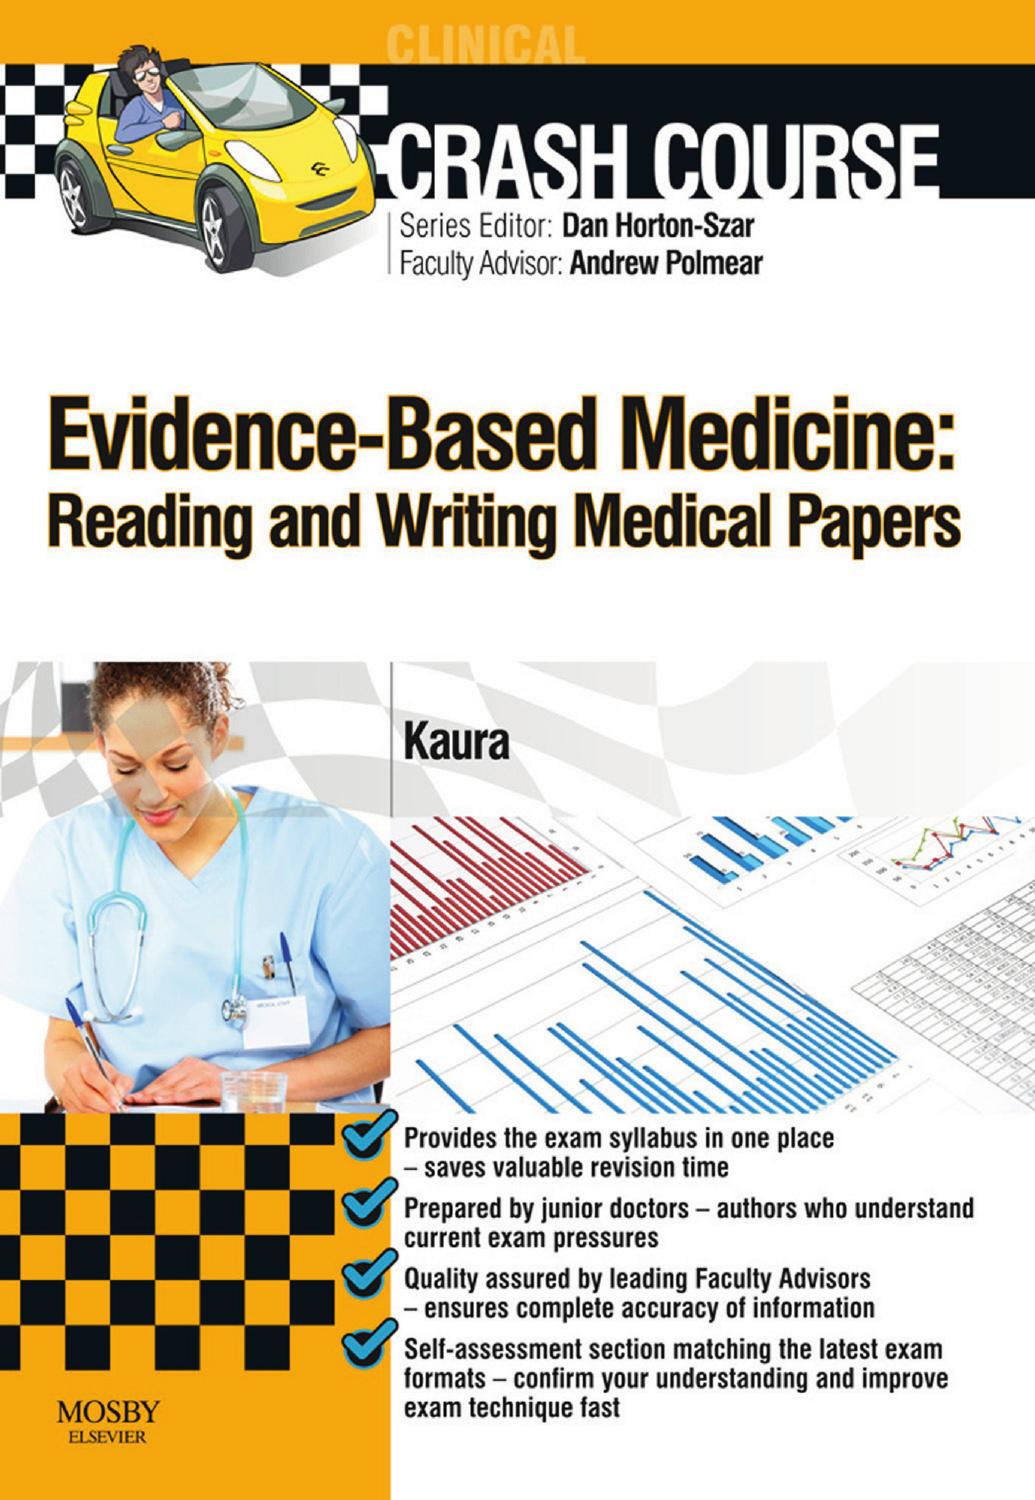 Crash Course: Evidence-Based Medicine: Reading and Writing Medical Papers